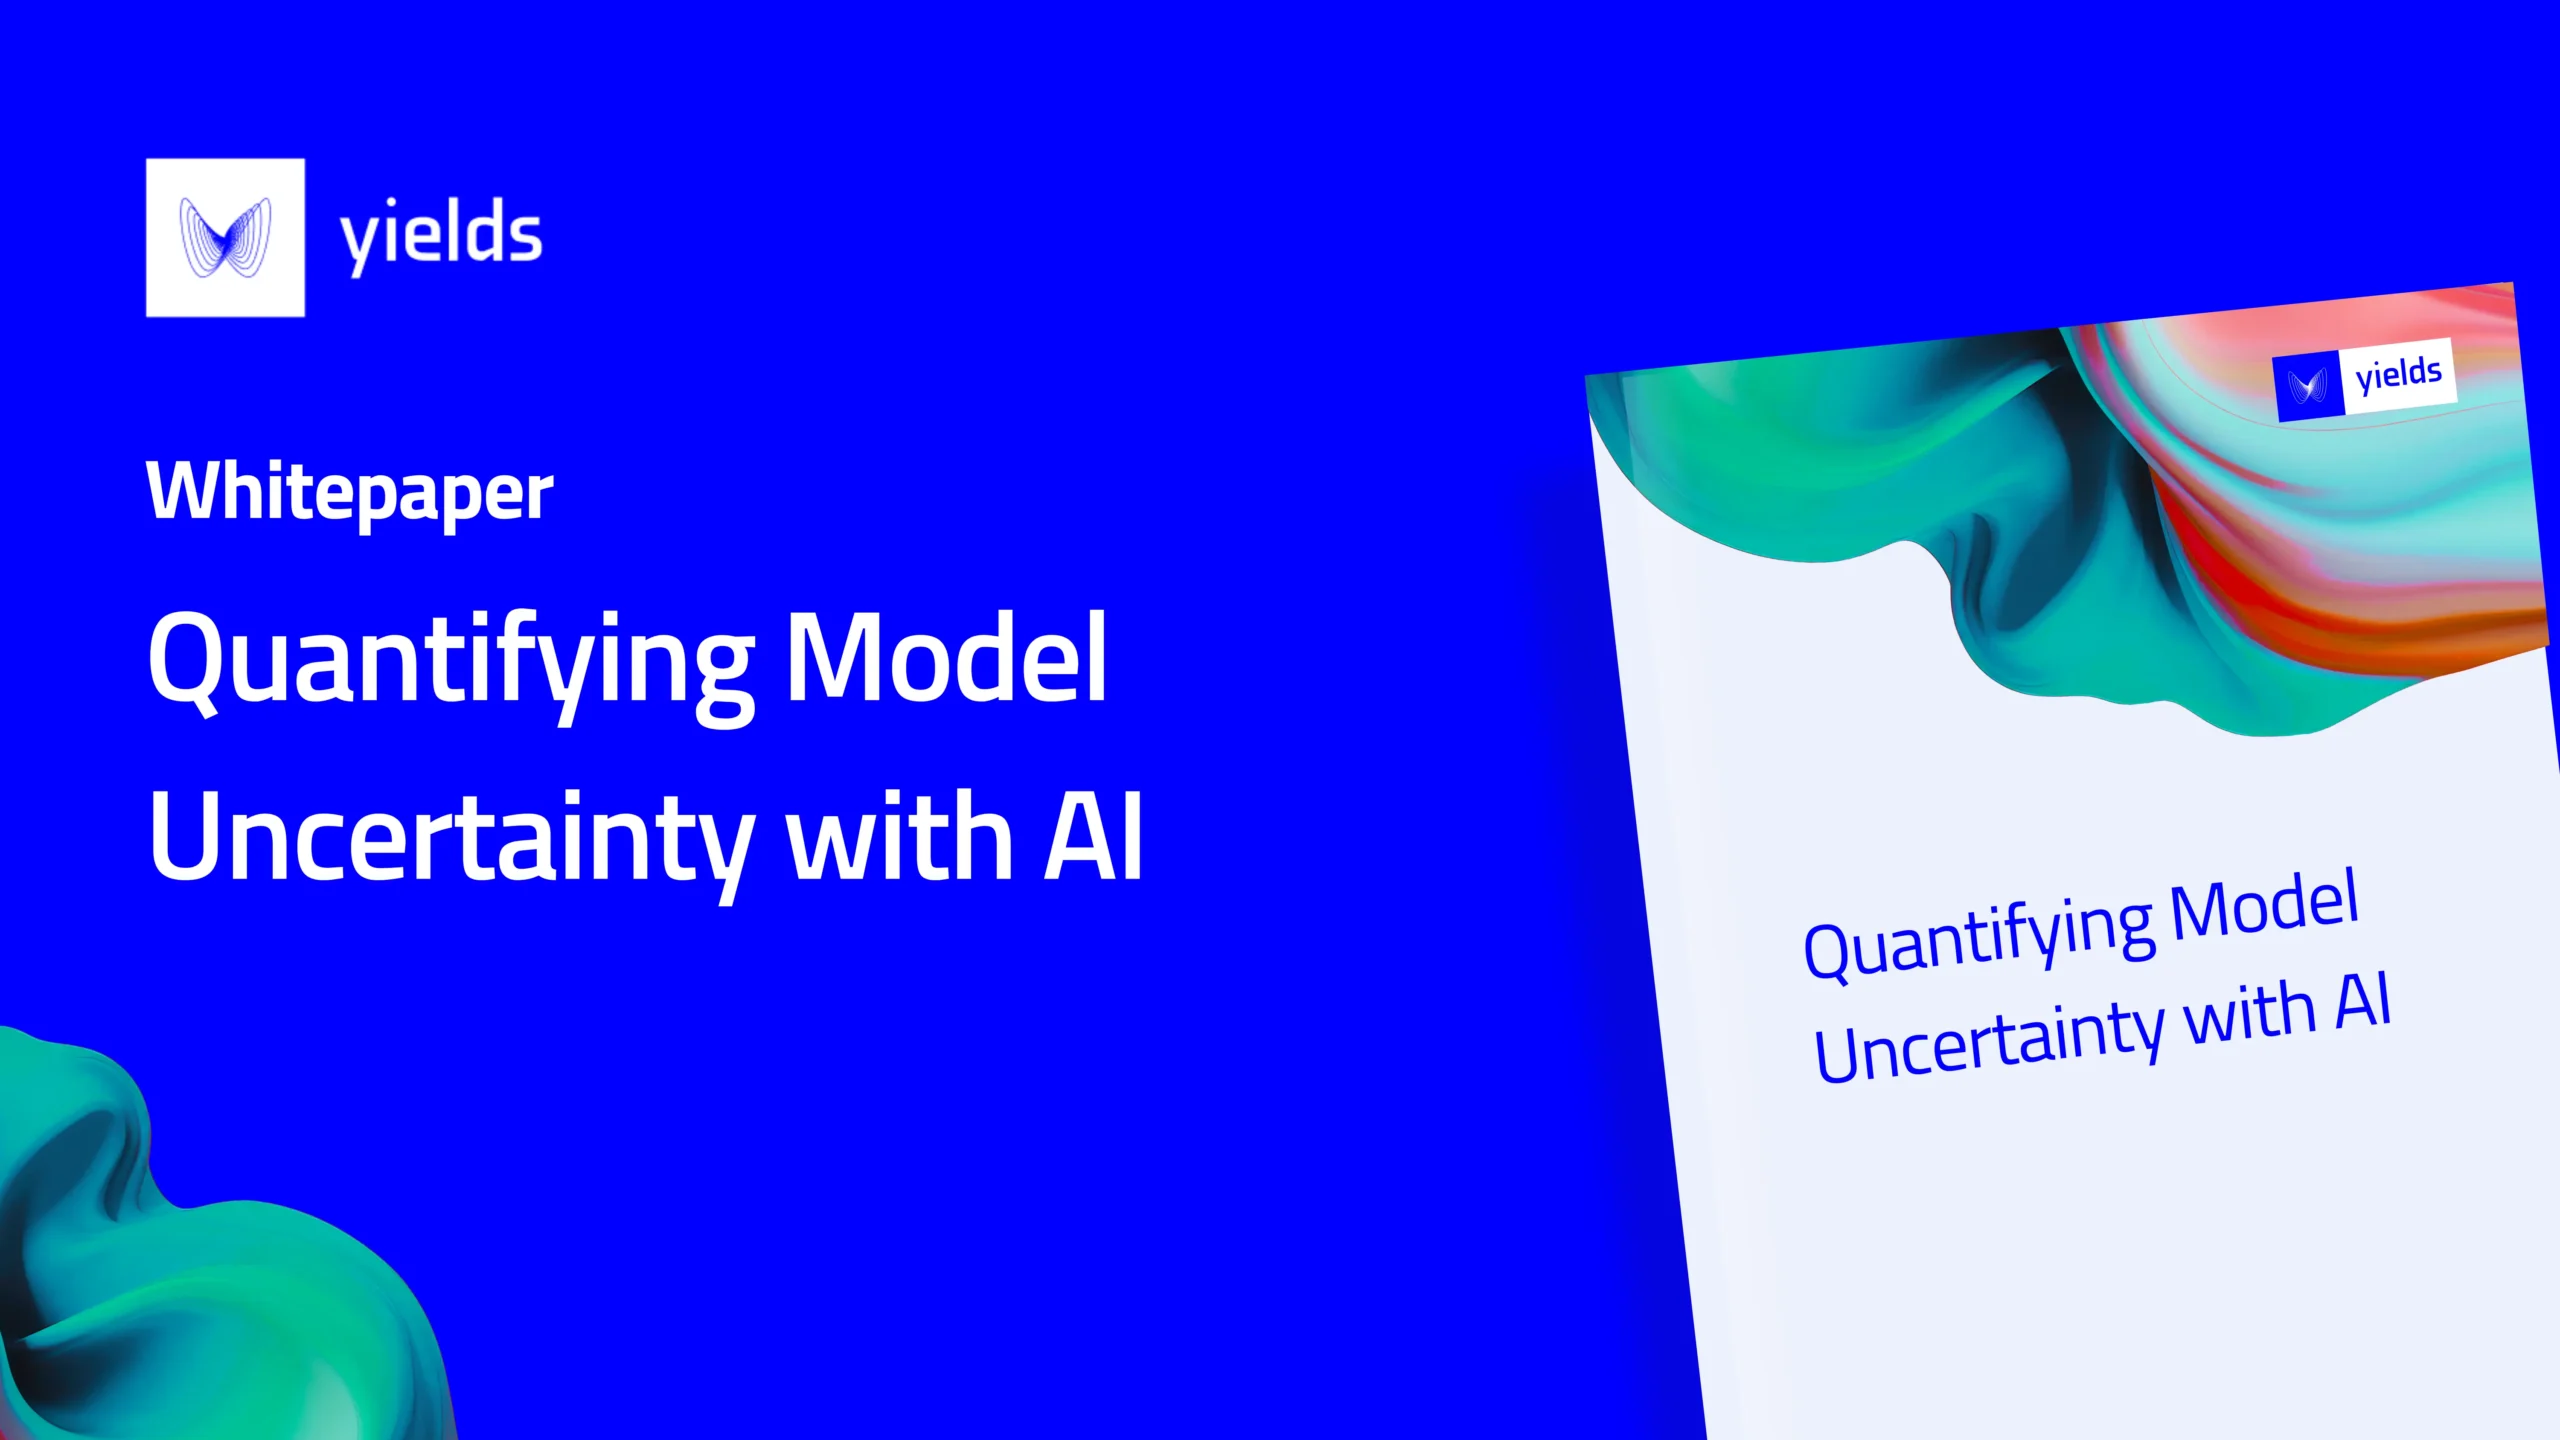 Quantifying Model Uncertainty with AI